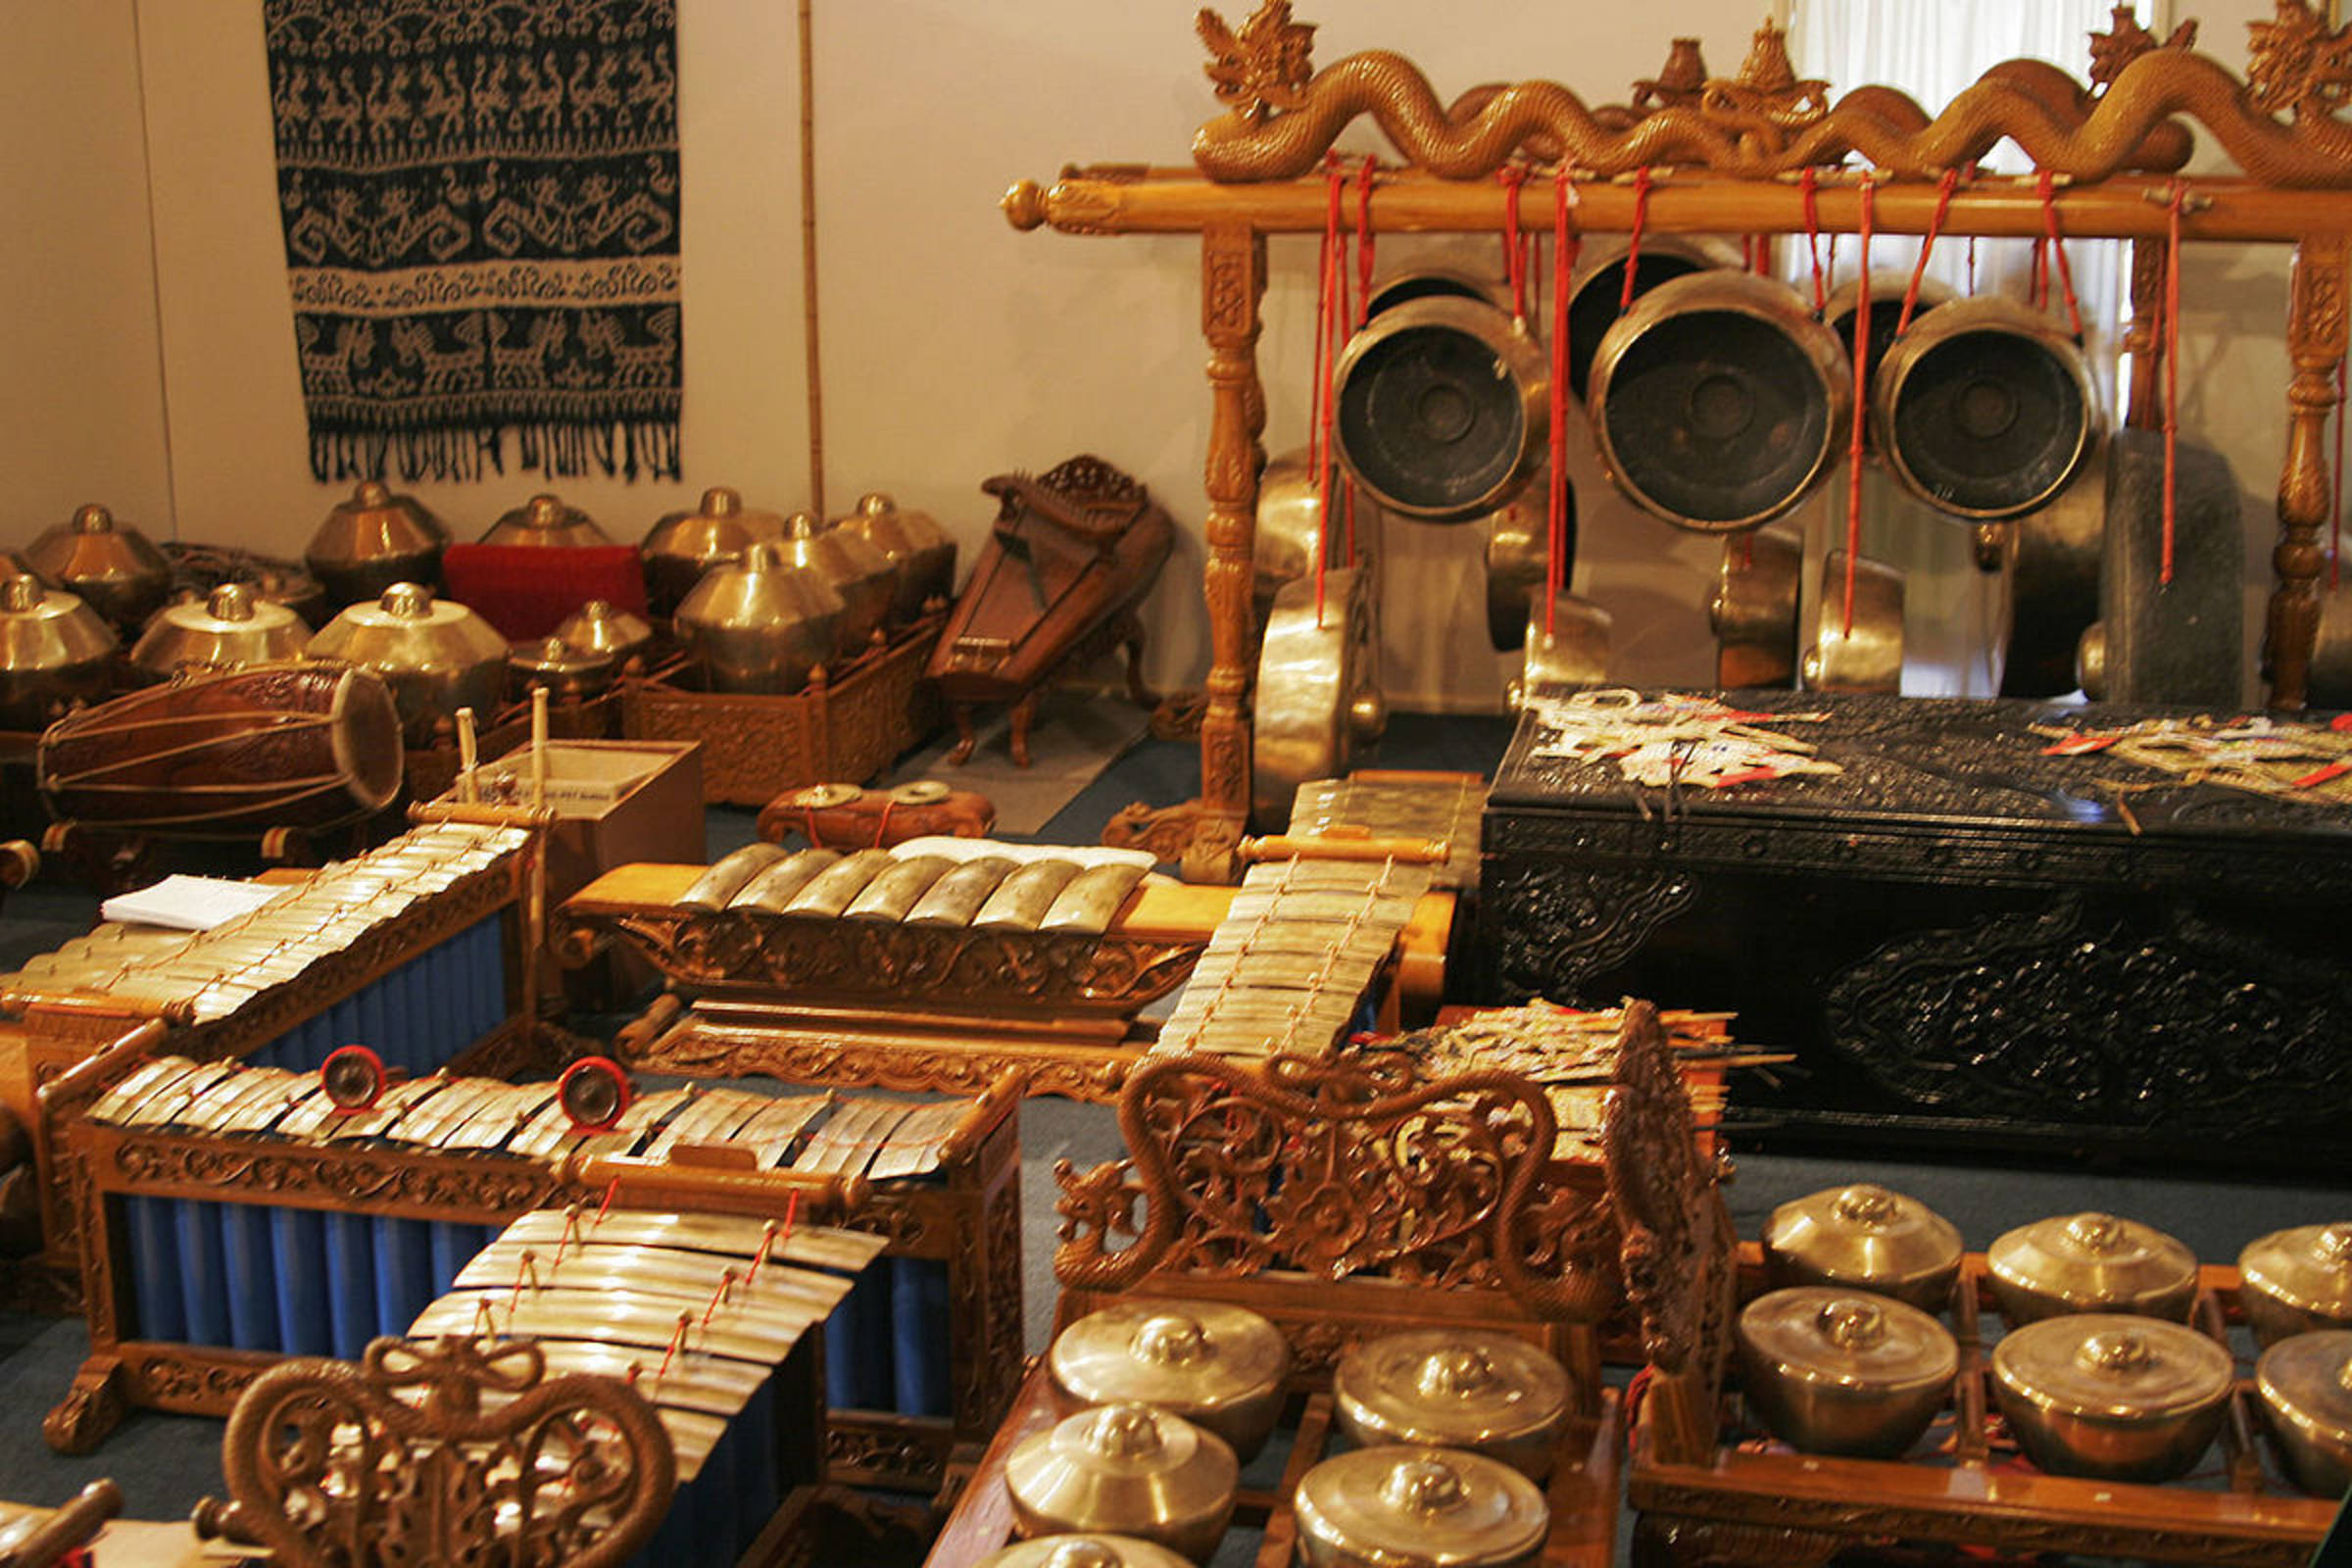 Li Zhi Xiong introduced the traditional Indonesian musical instrument "Gamelan" to readers. (Photo / Provided by Li Zhi Xiong)